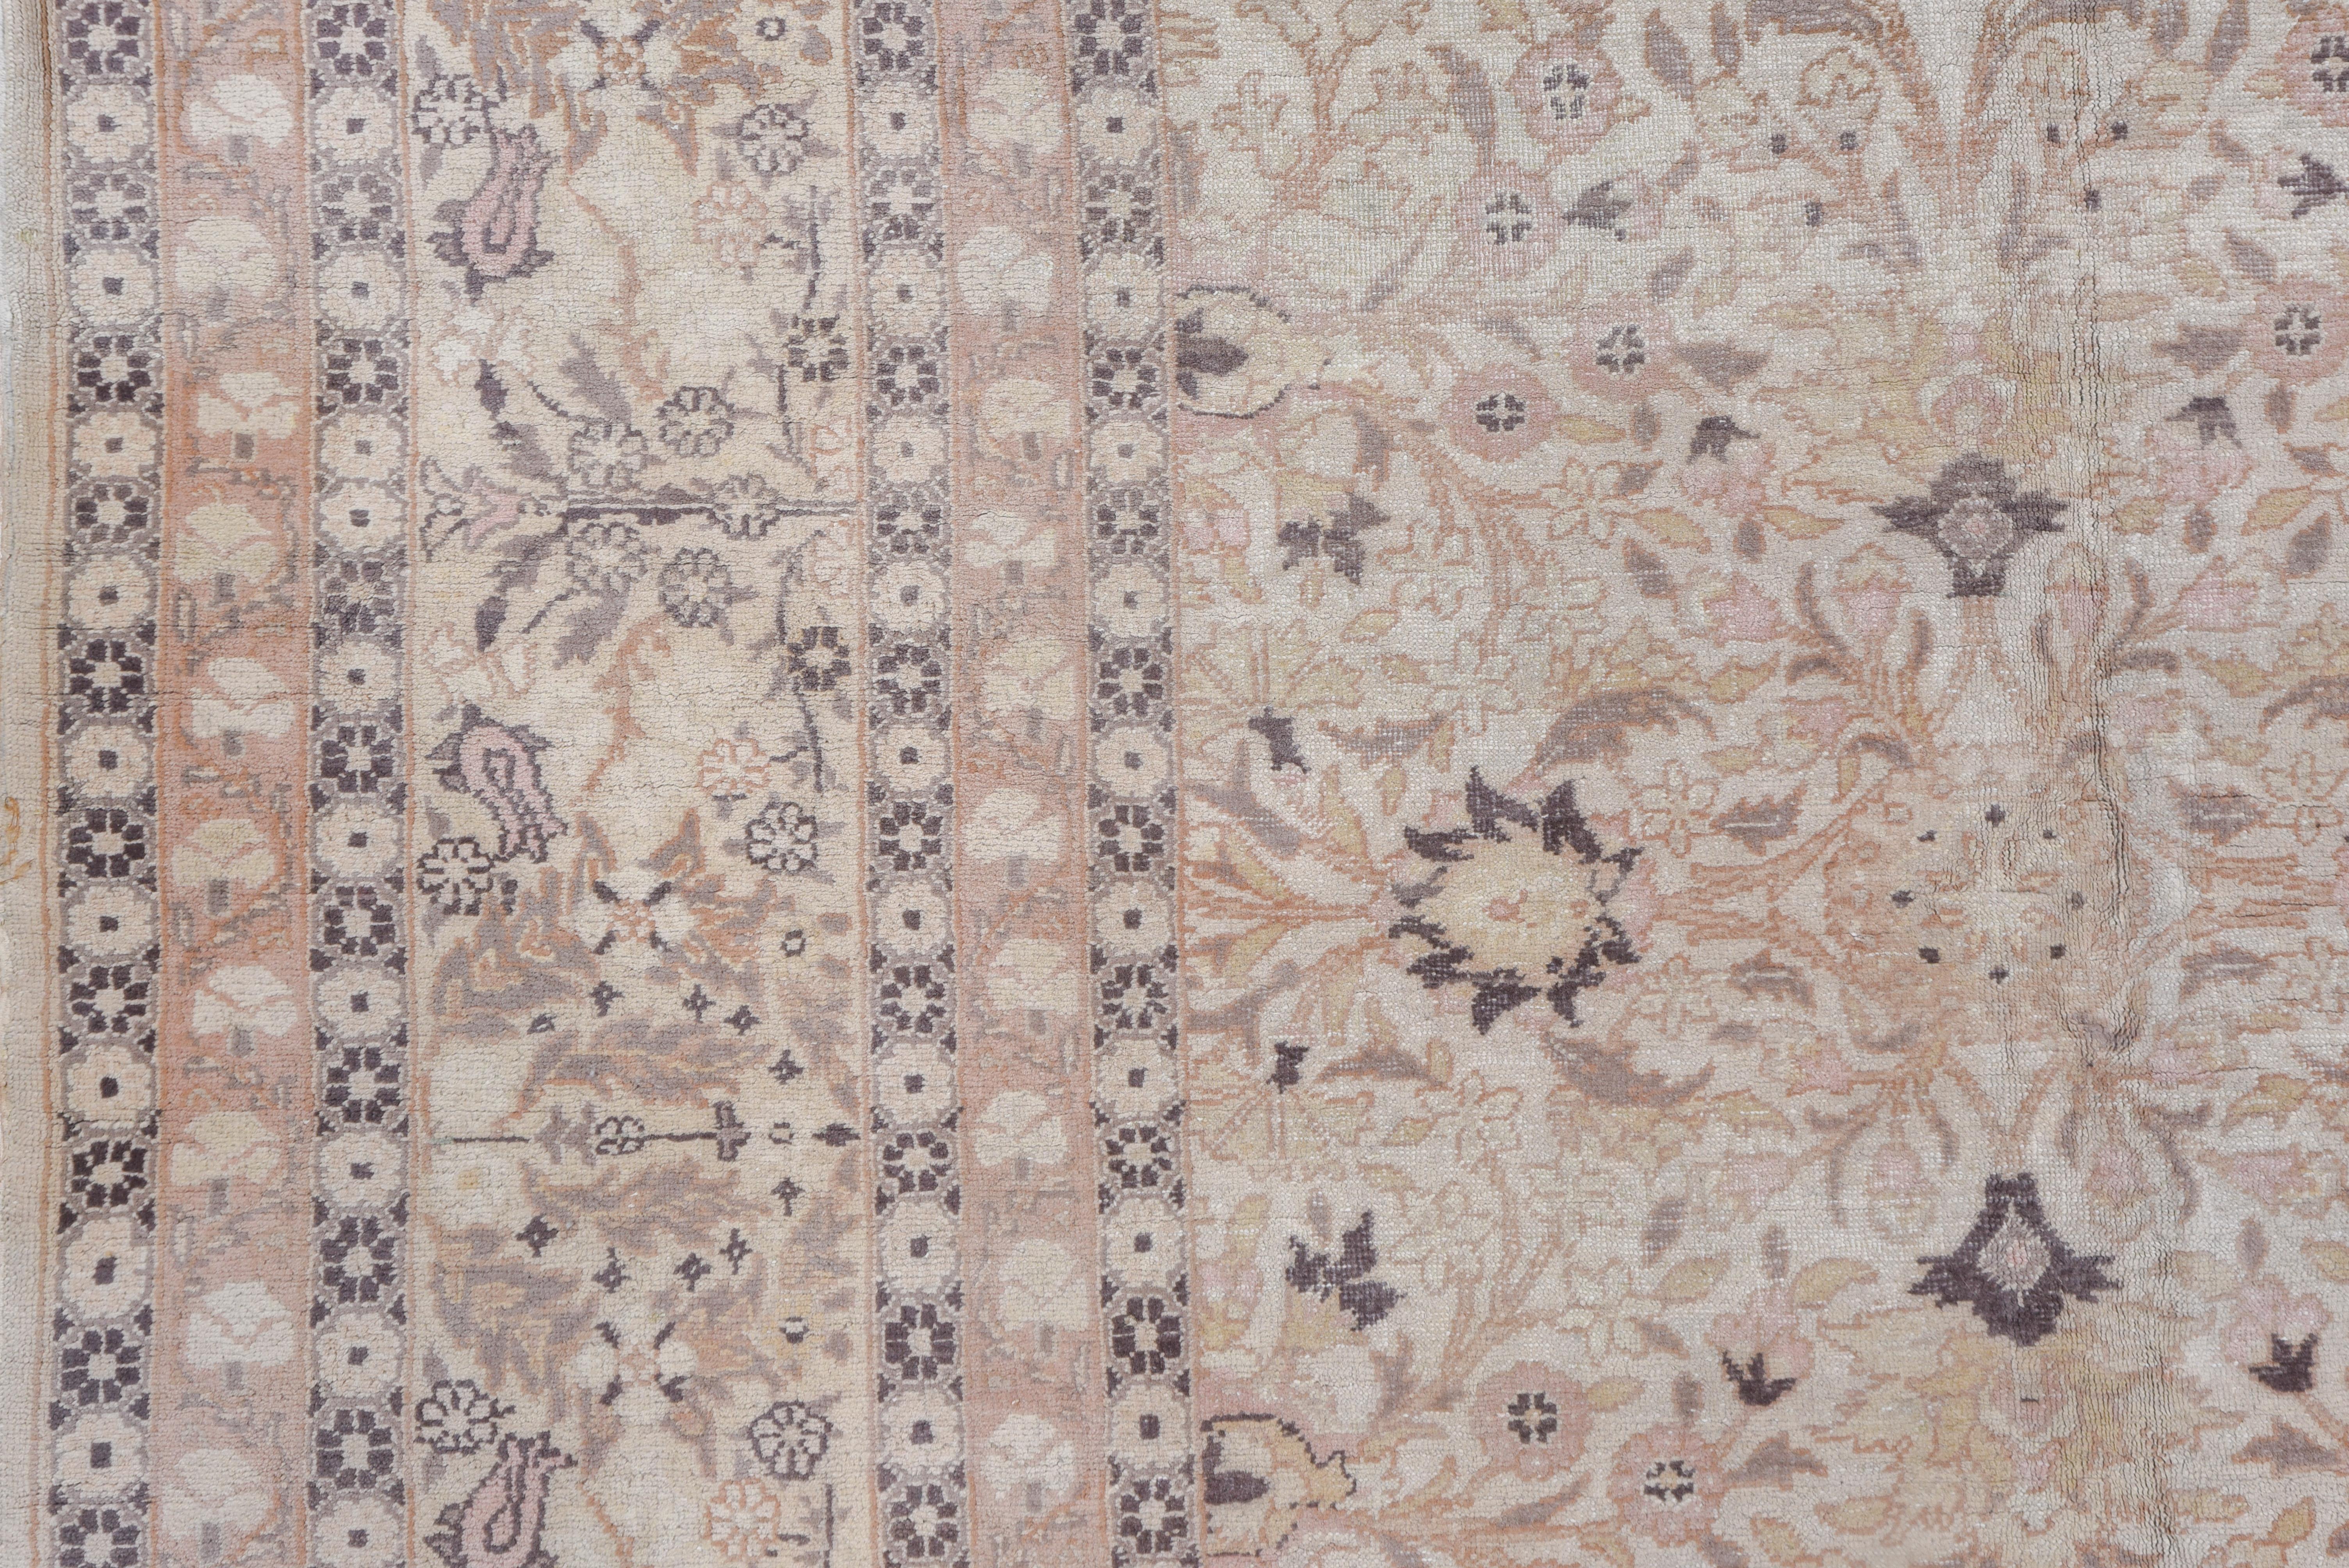 The ivory field of this urban western Turkish antique carpet shows a centralized, four part pattern of sharp petal palmettes, tulips, flower sprays and vinery detailed in corresponding lighter tones, with a sand border of complete flowers, tulips